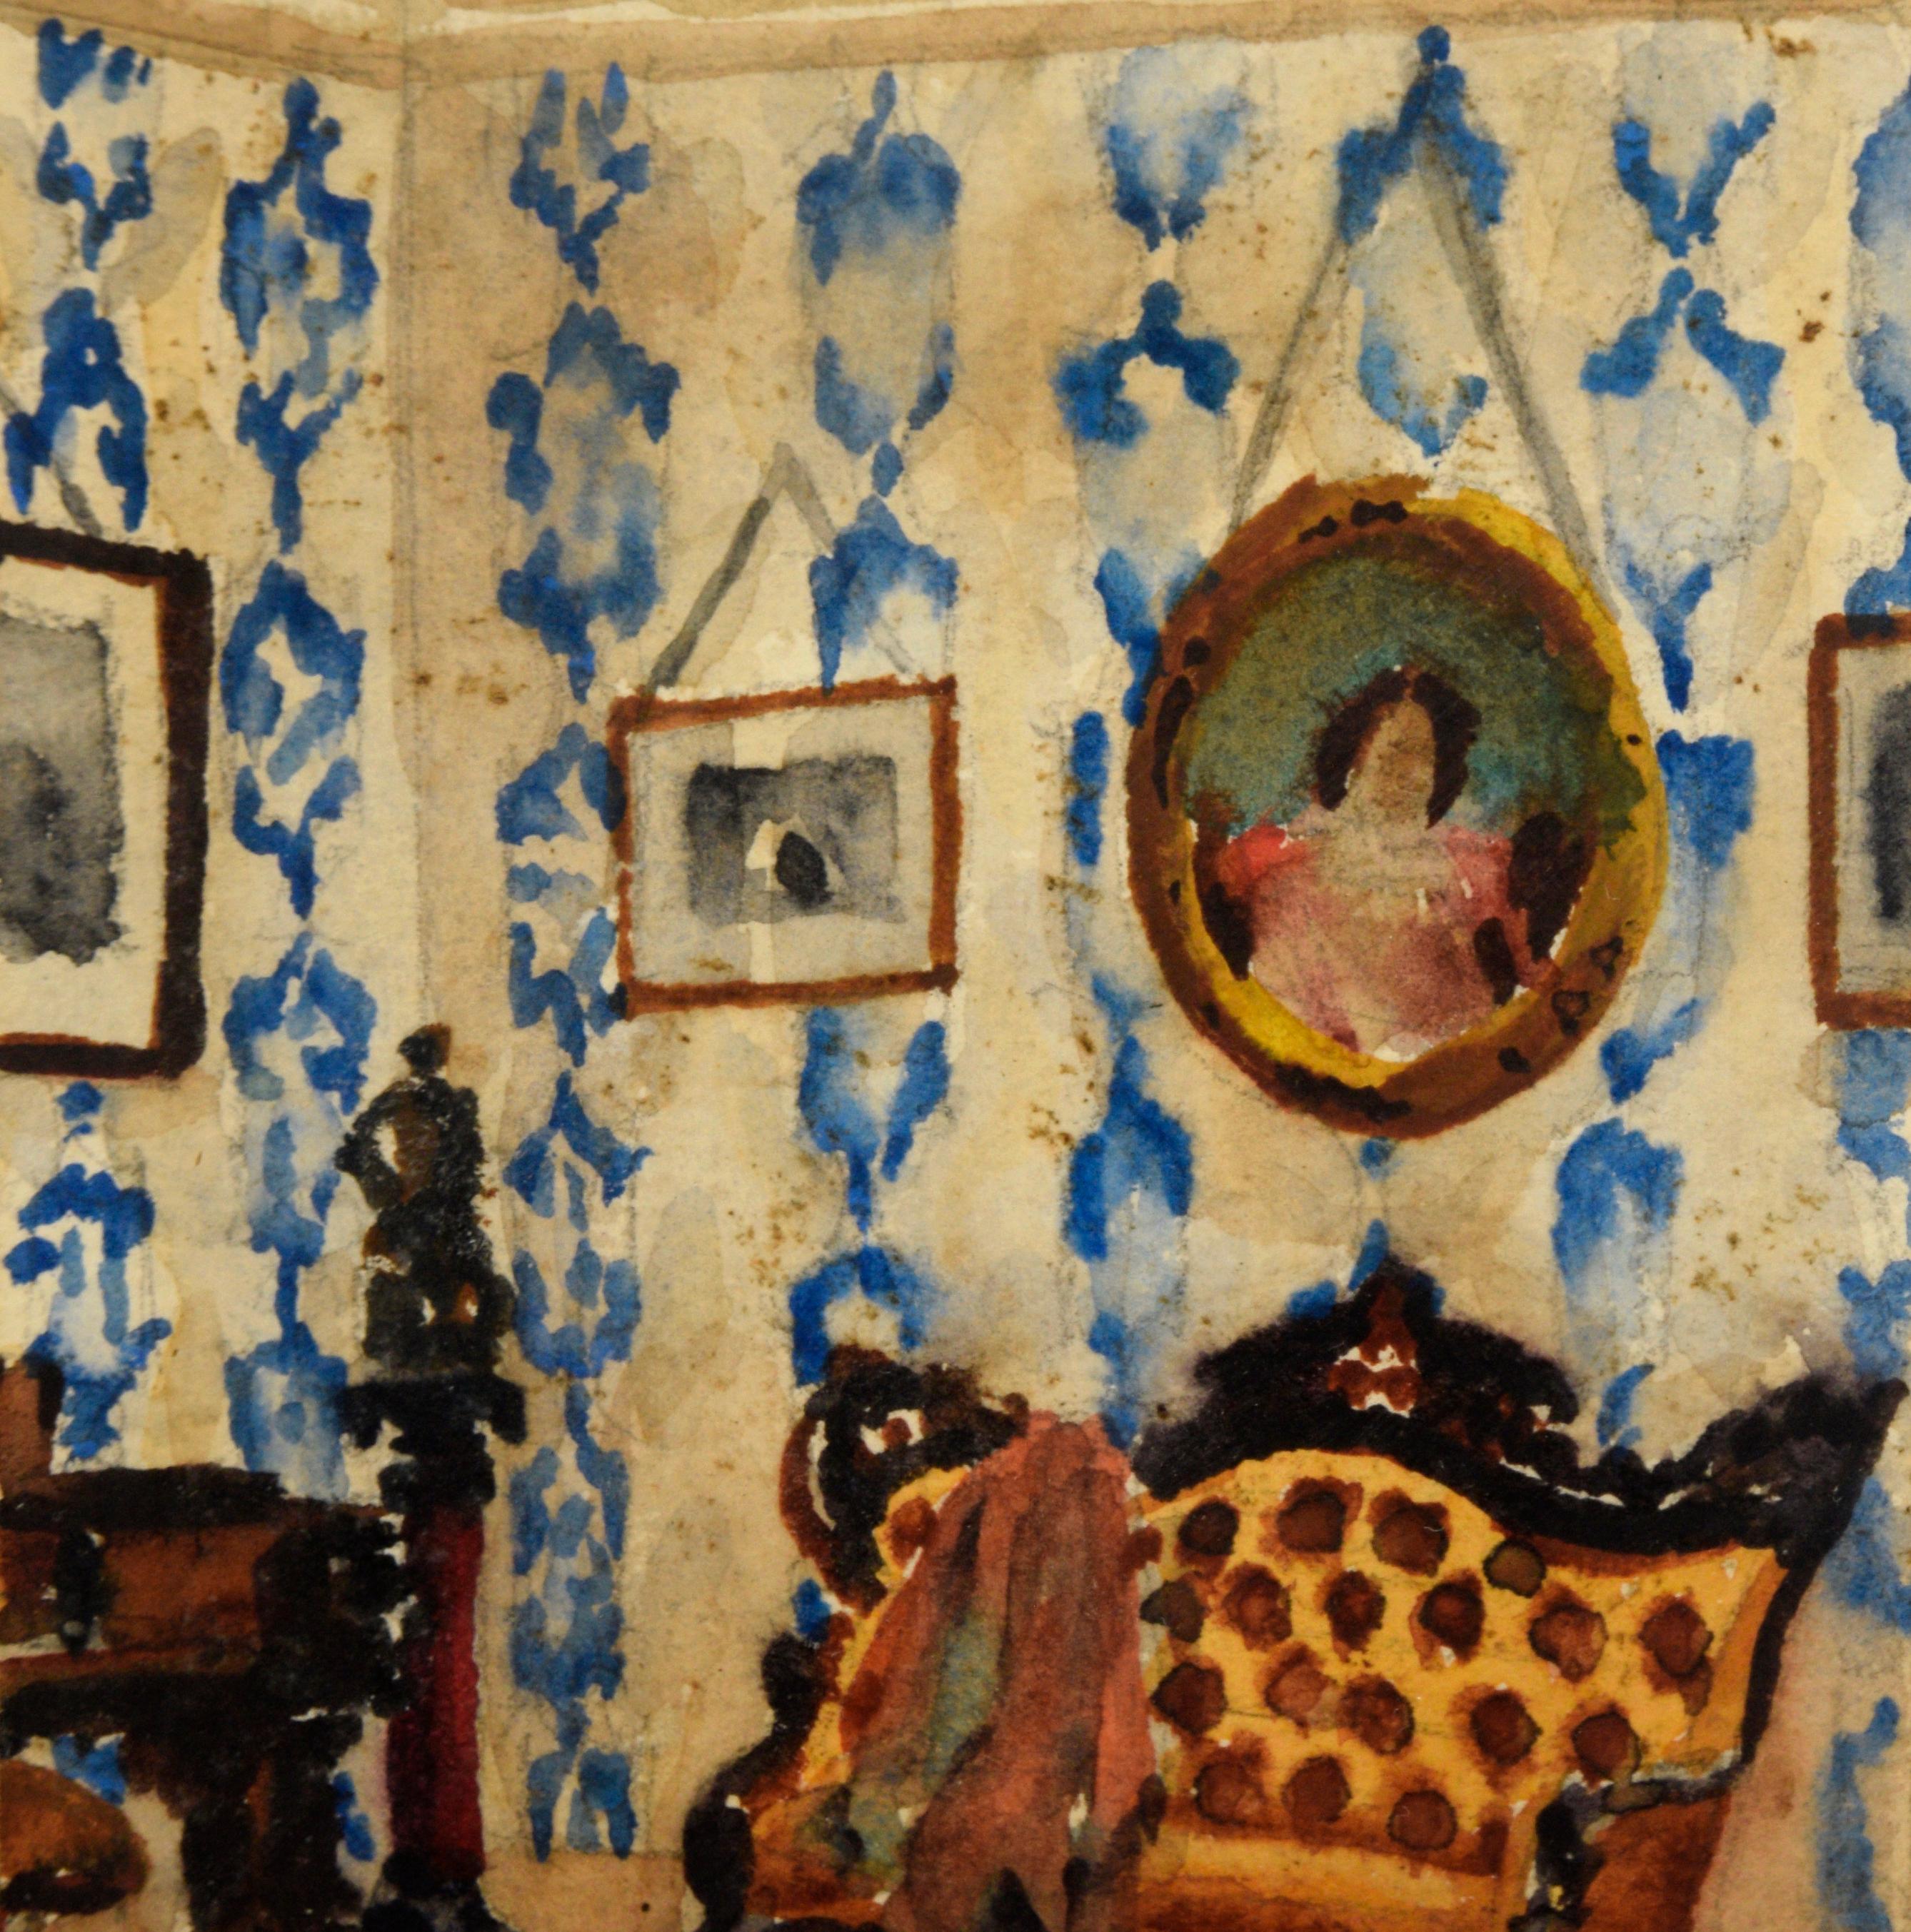 Stately pair of watercolors by David Mode Payne (American, 1907-1985). The scene depicted is an interior of an opulent room, with finely crafted furniture and paintings hanging on a wall with blue patterned wallpaper. The scene continues across the